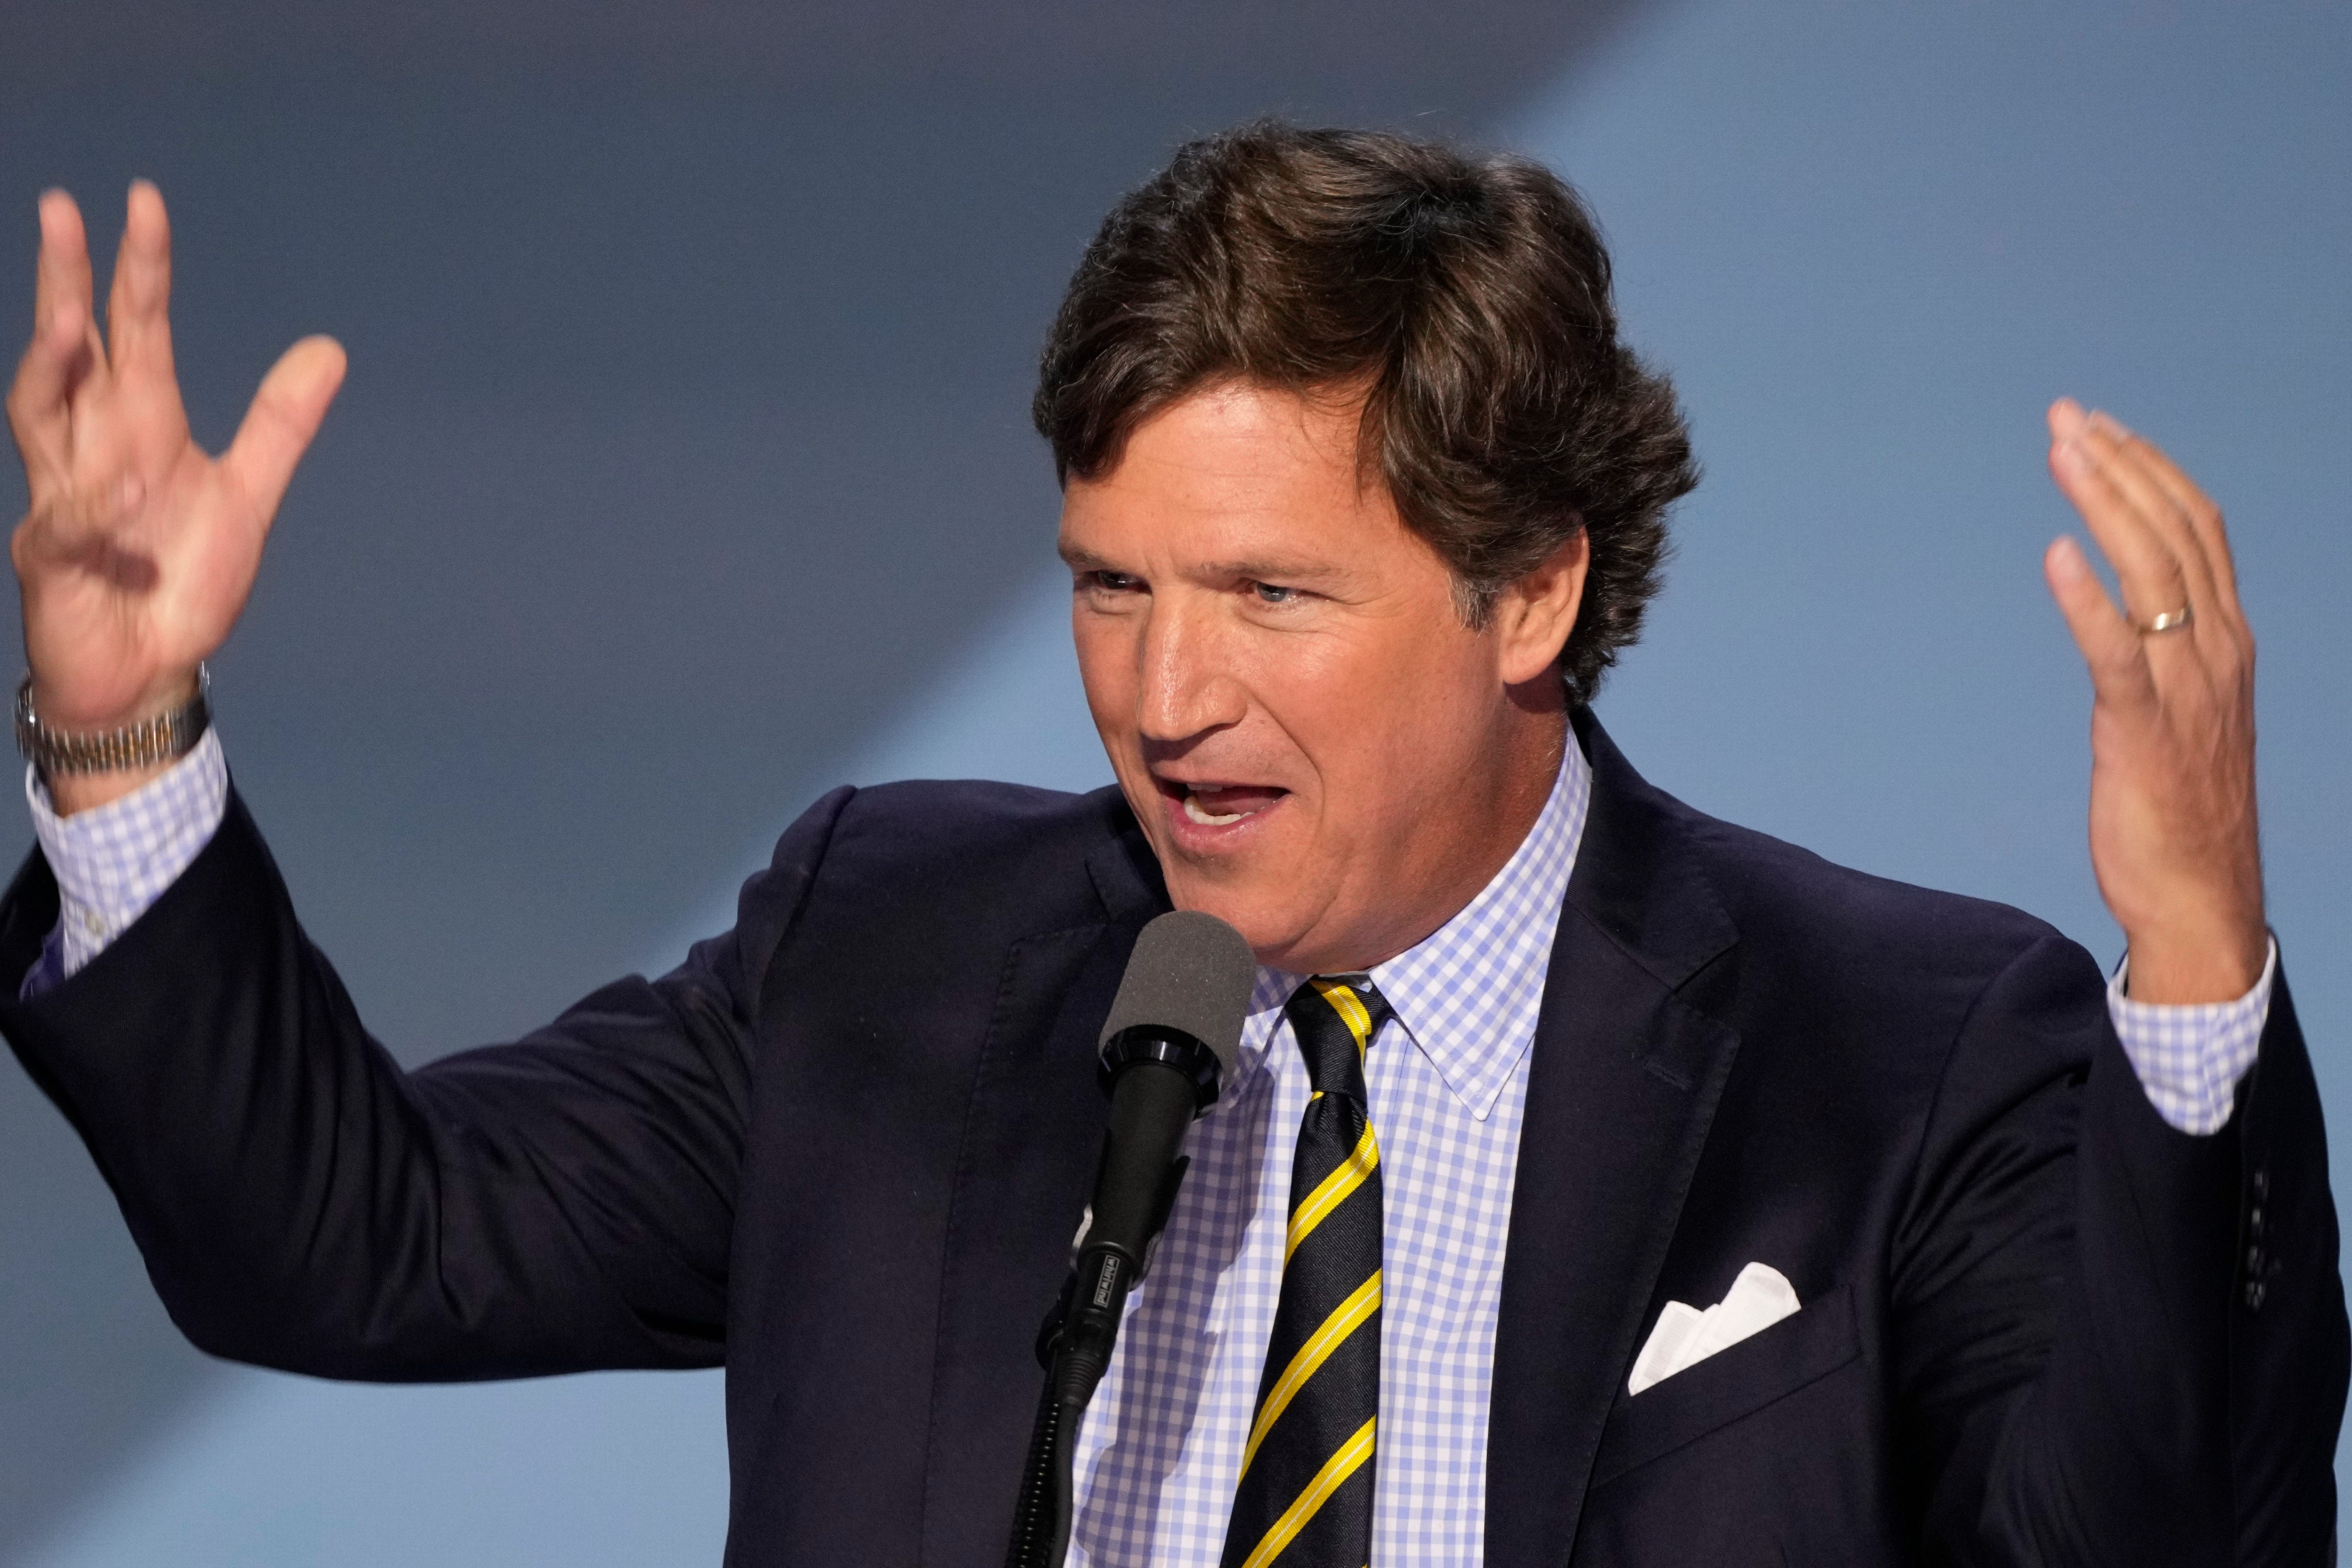 Tucker Carlson goes unscripted for Republican National Convention speech: Watch